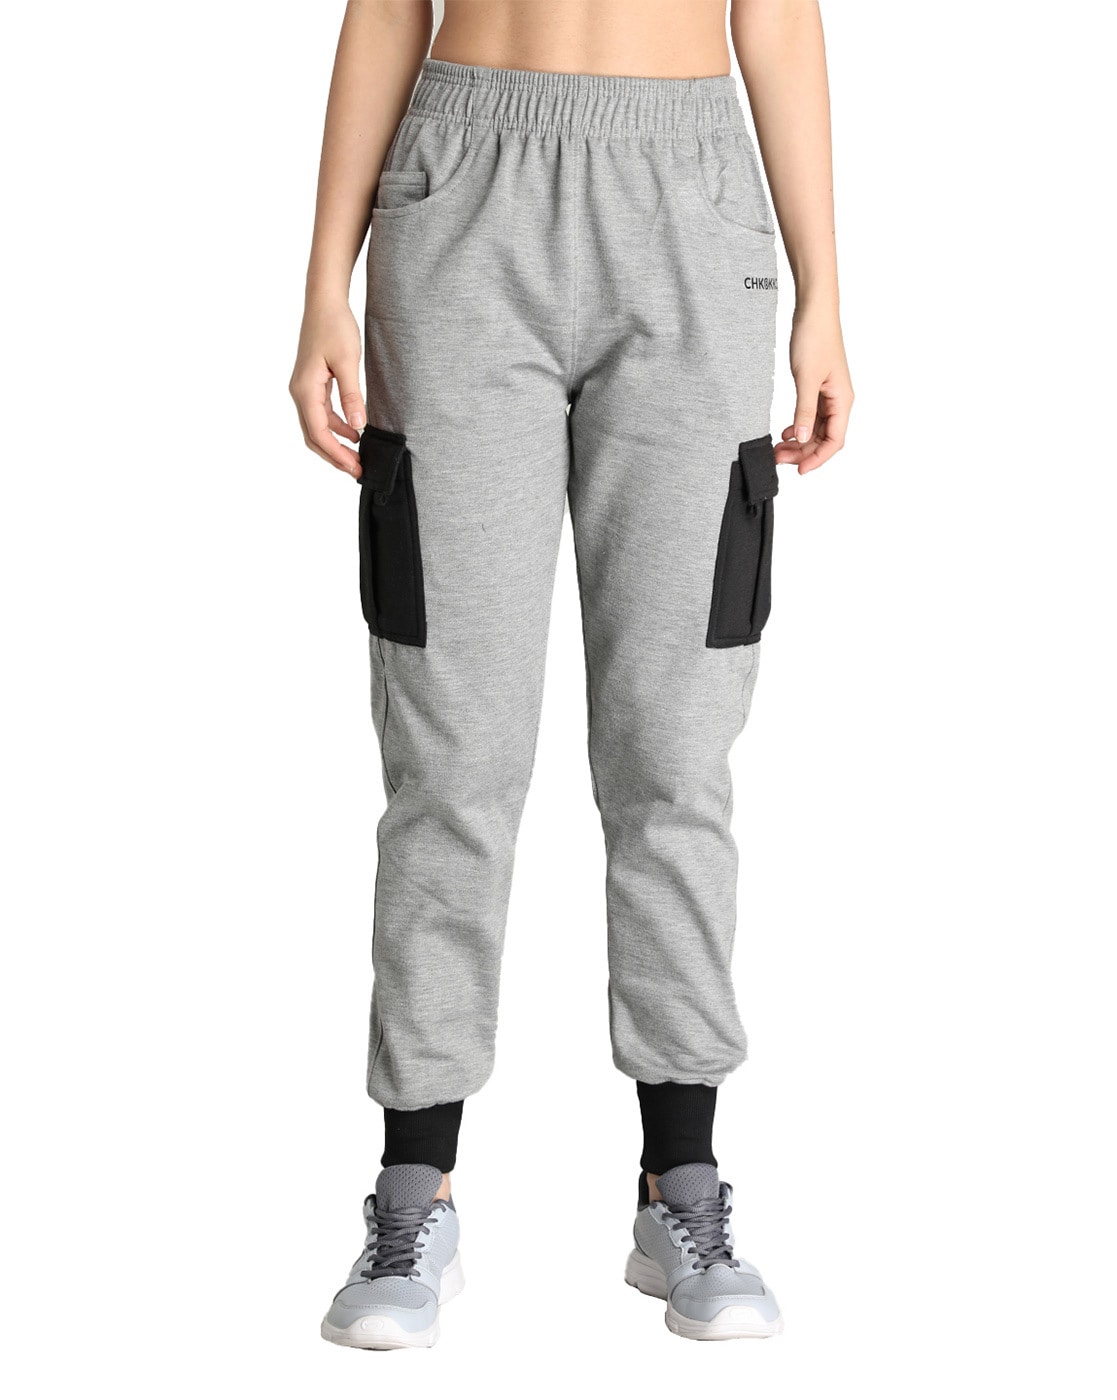 Track Pants For Women Online  Buy Cargo Track Pants  Styched Fashion